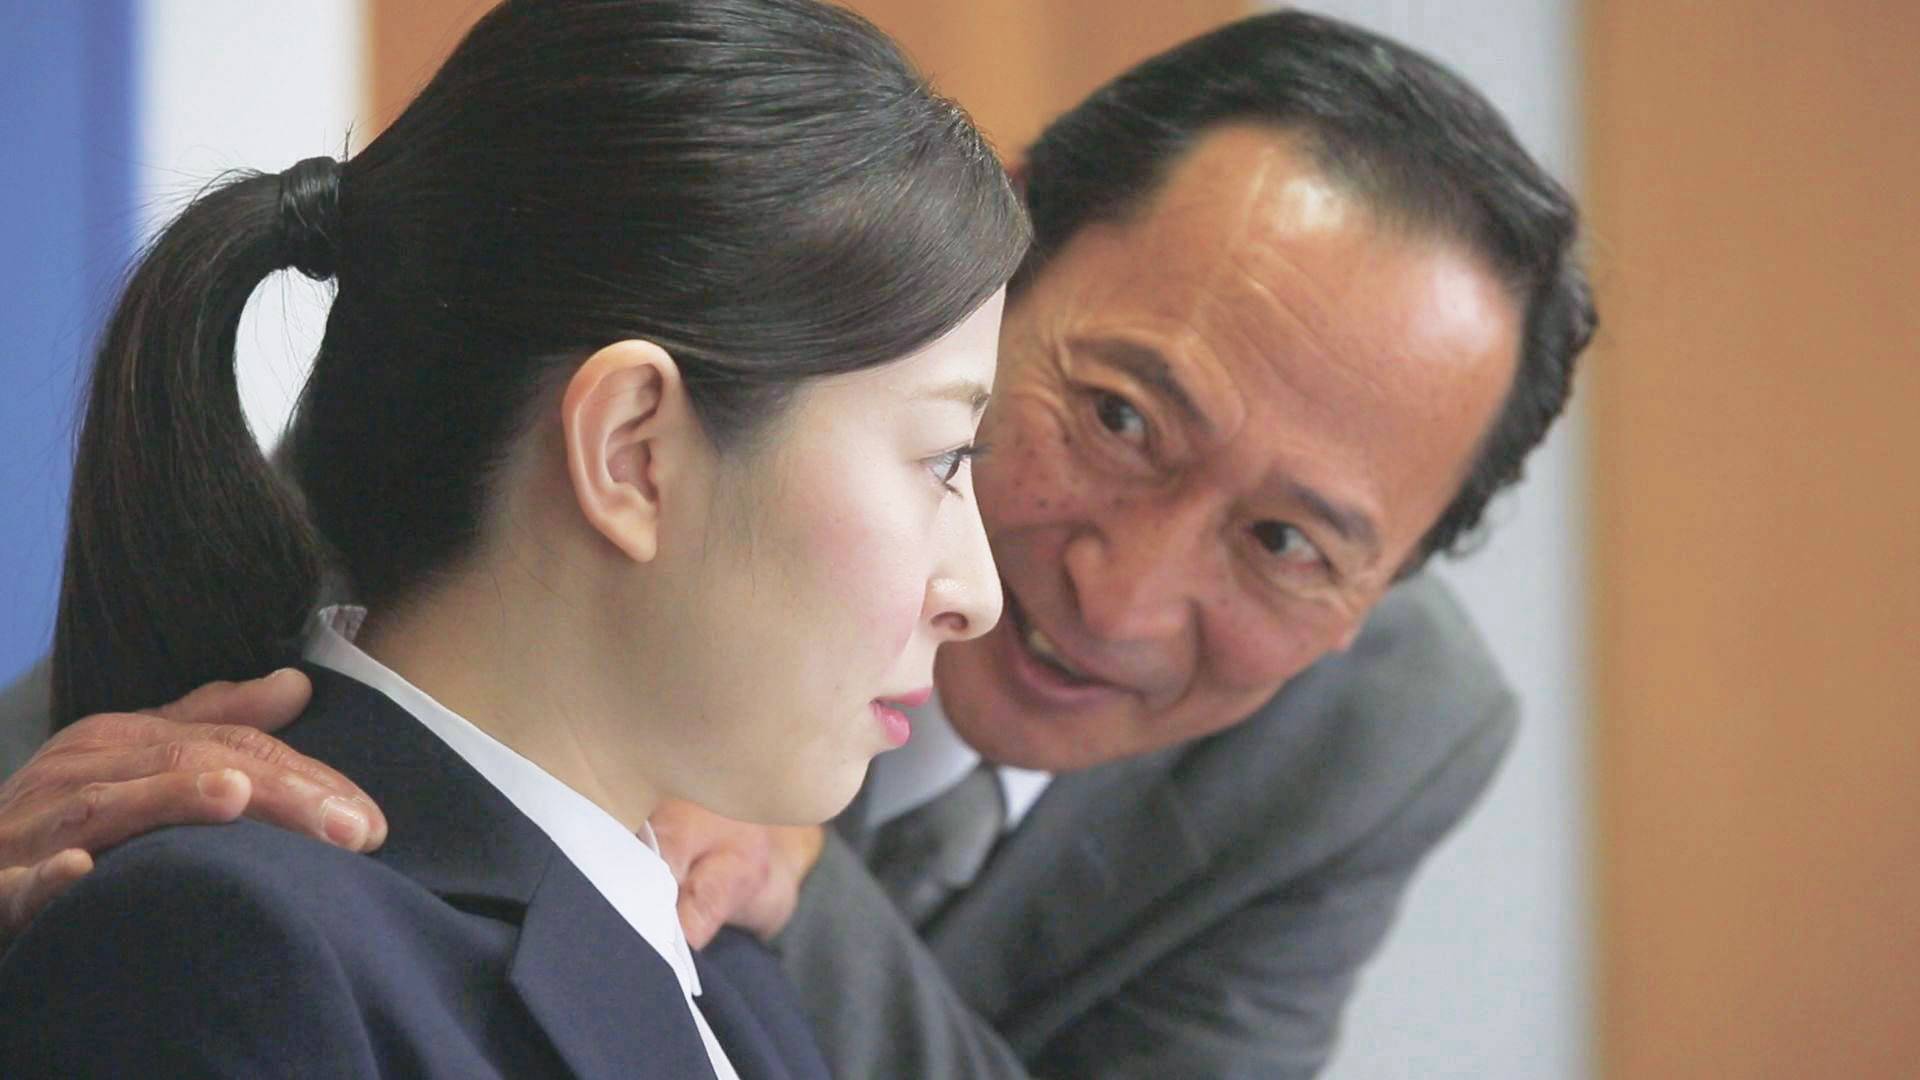 Japans government releases video to help eradicate harassment from politics image